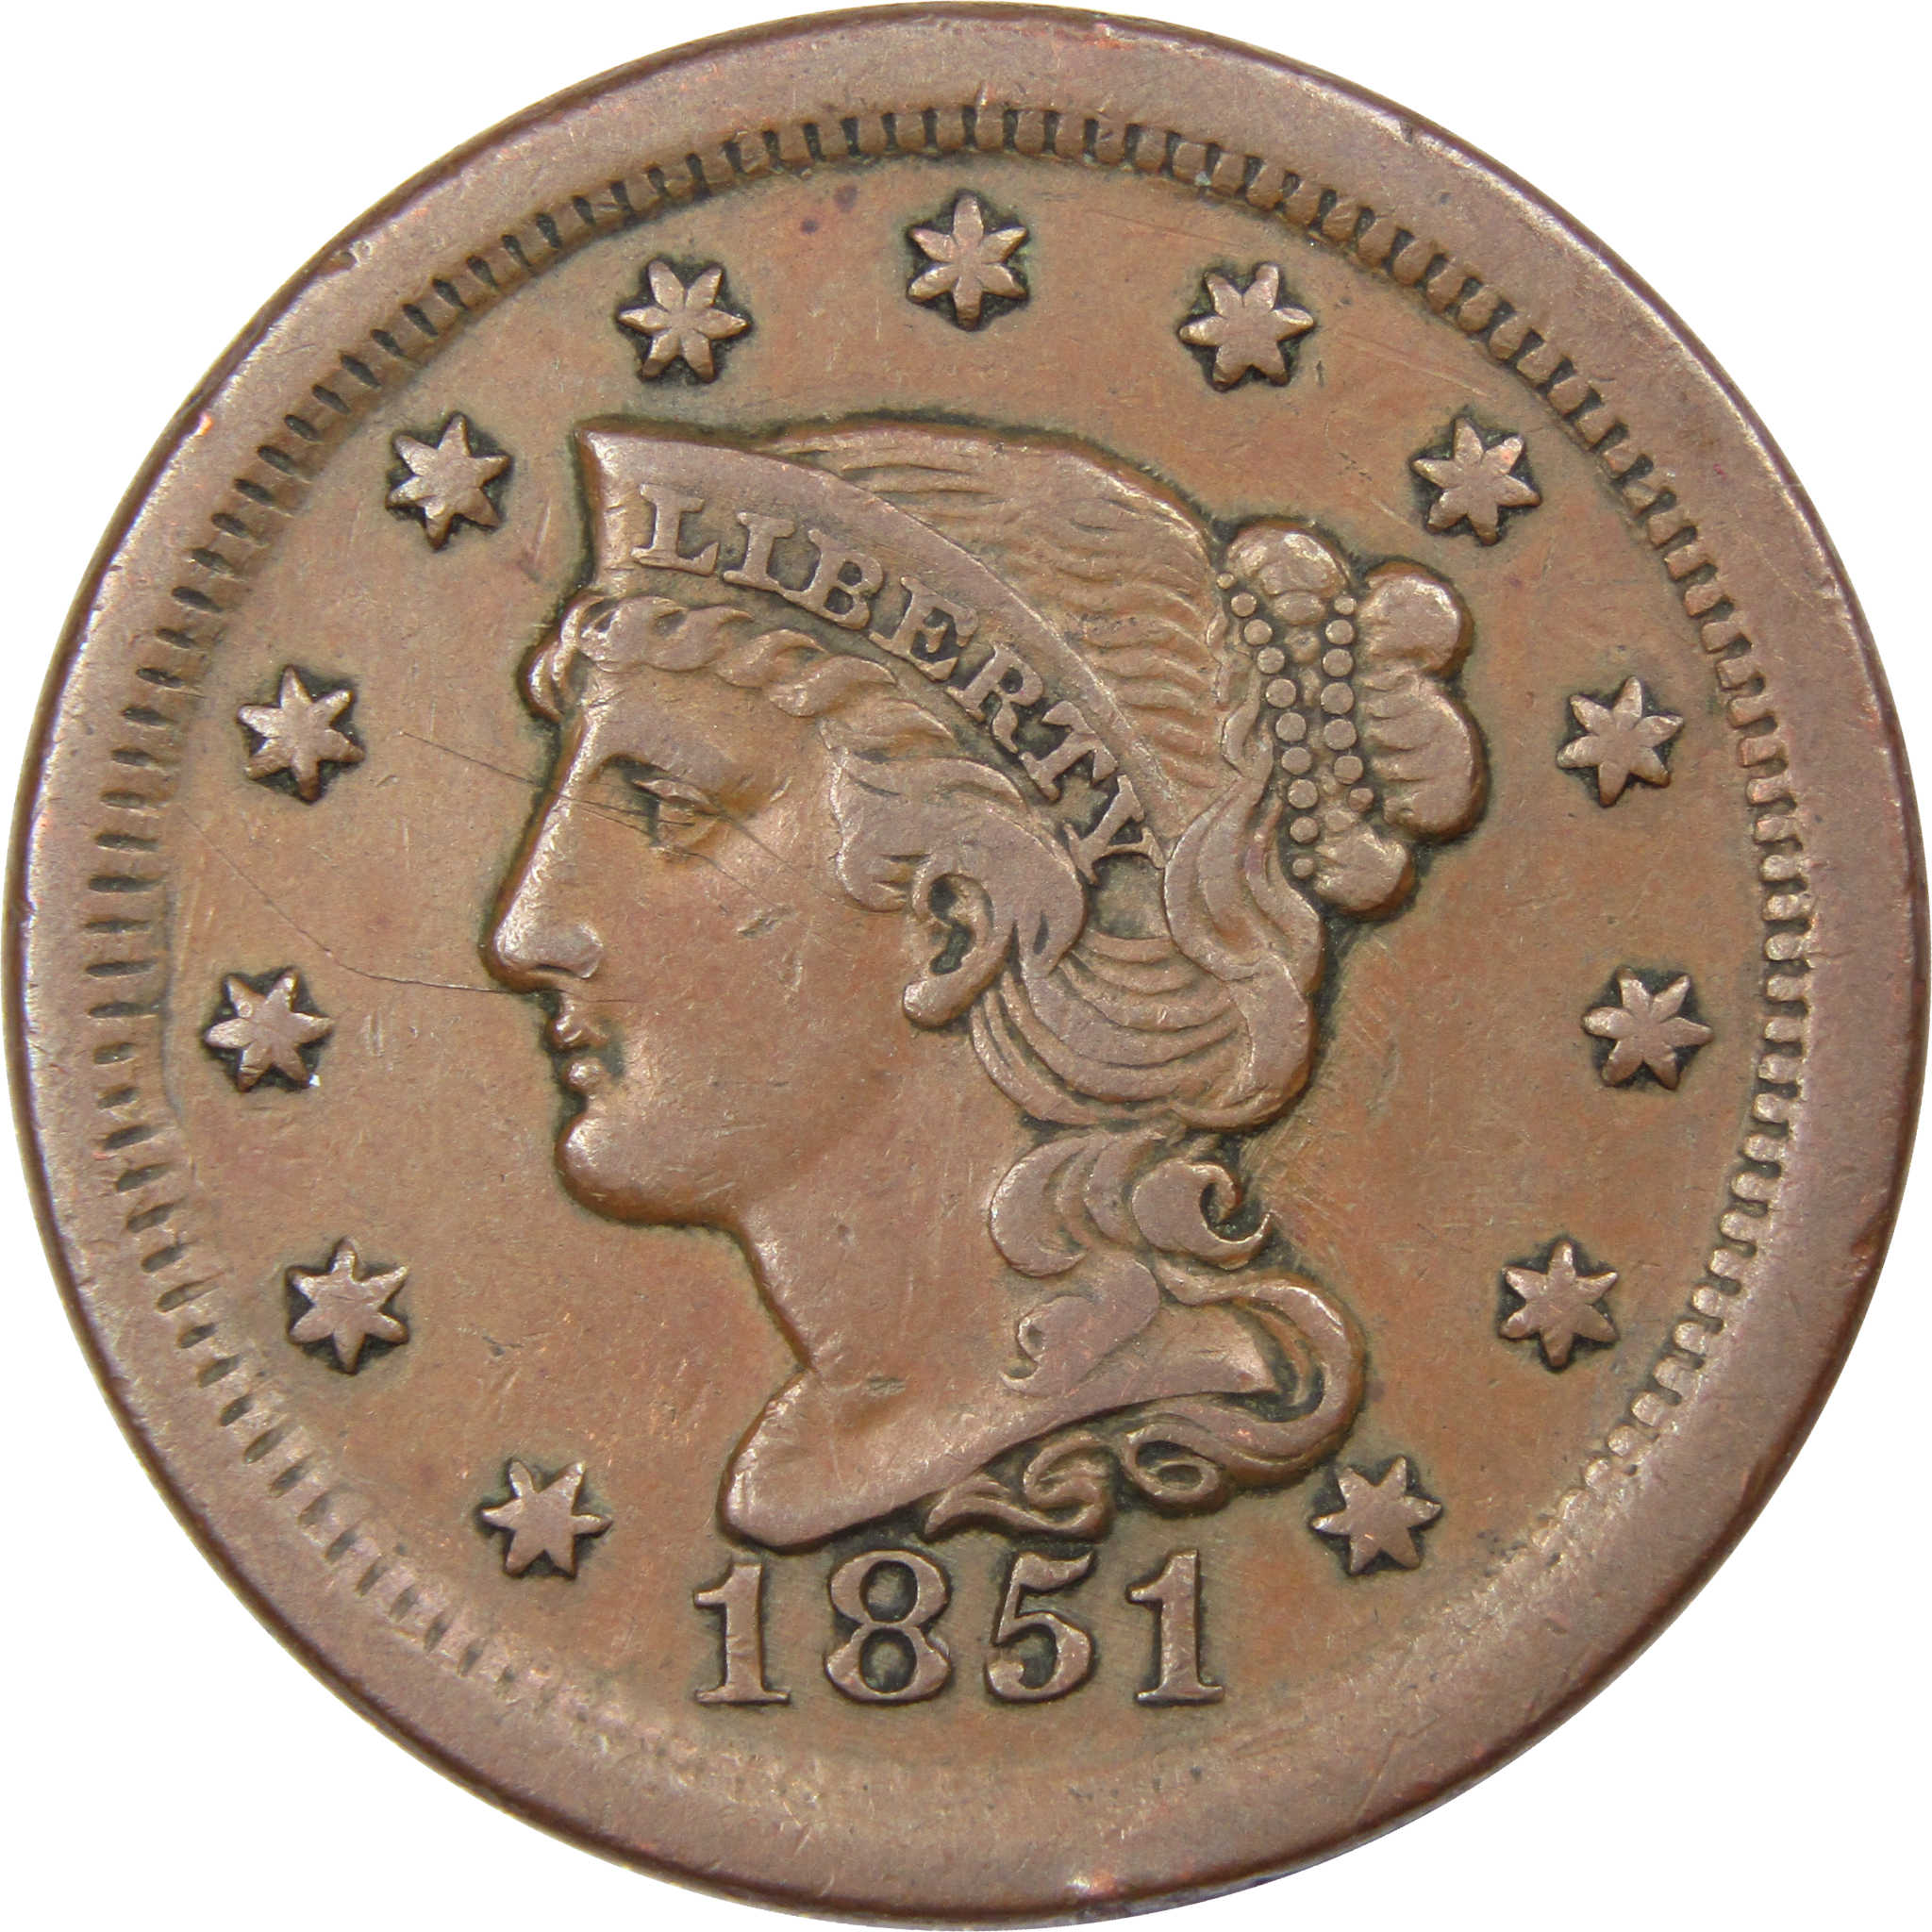 1851 US Half Cent Braided Hair AU Almost Uncirculated Rare Copper Penny  Coin - For Sale, Buy Now Online - Item #700680